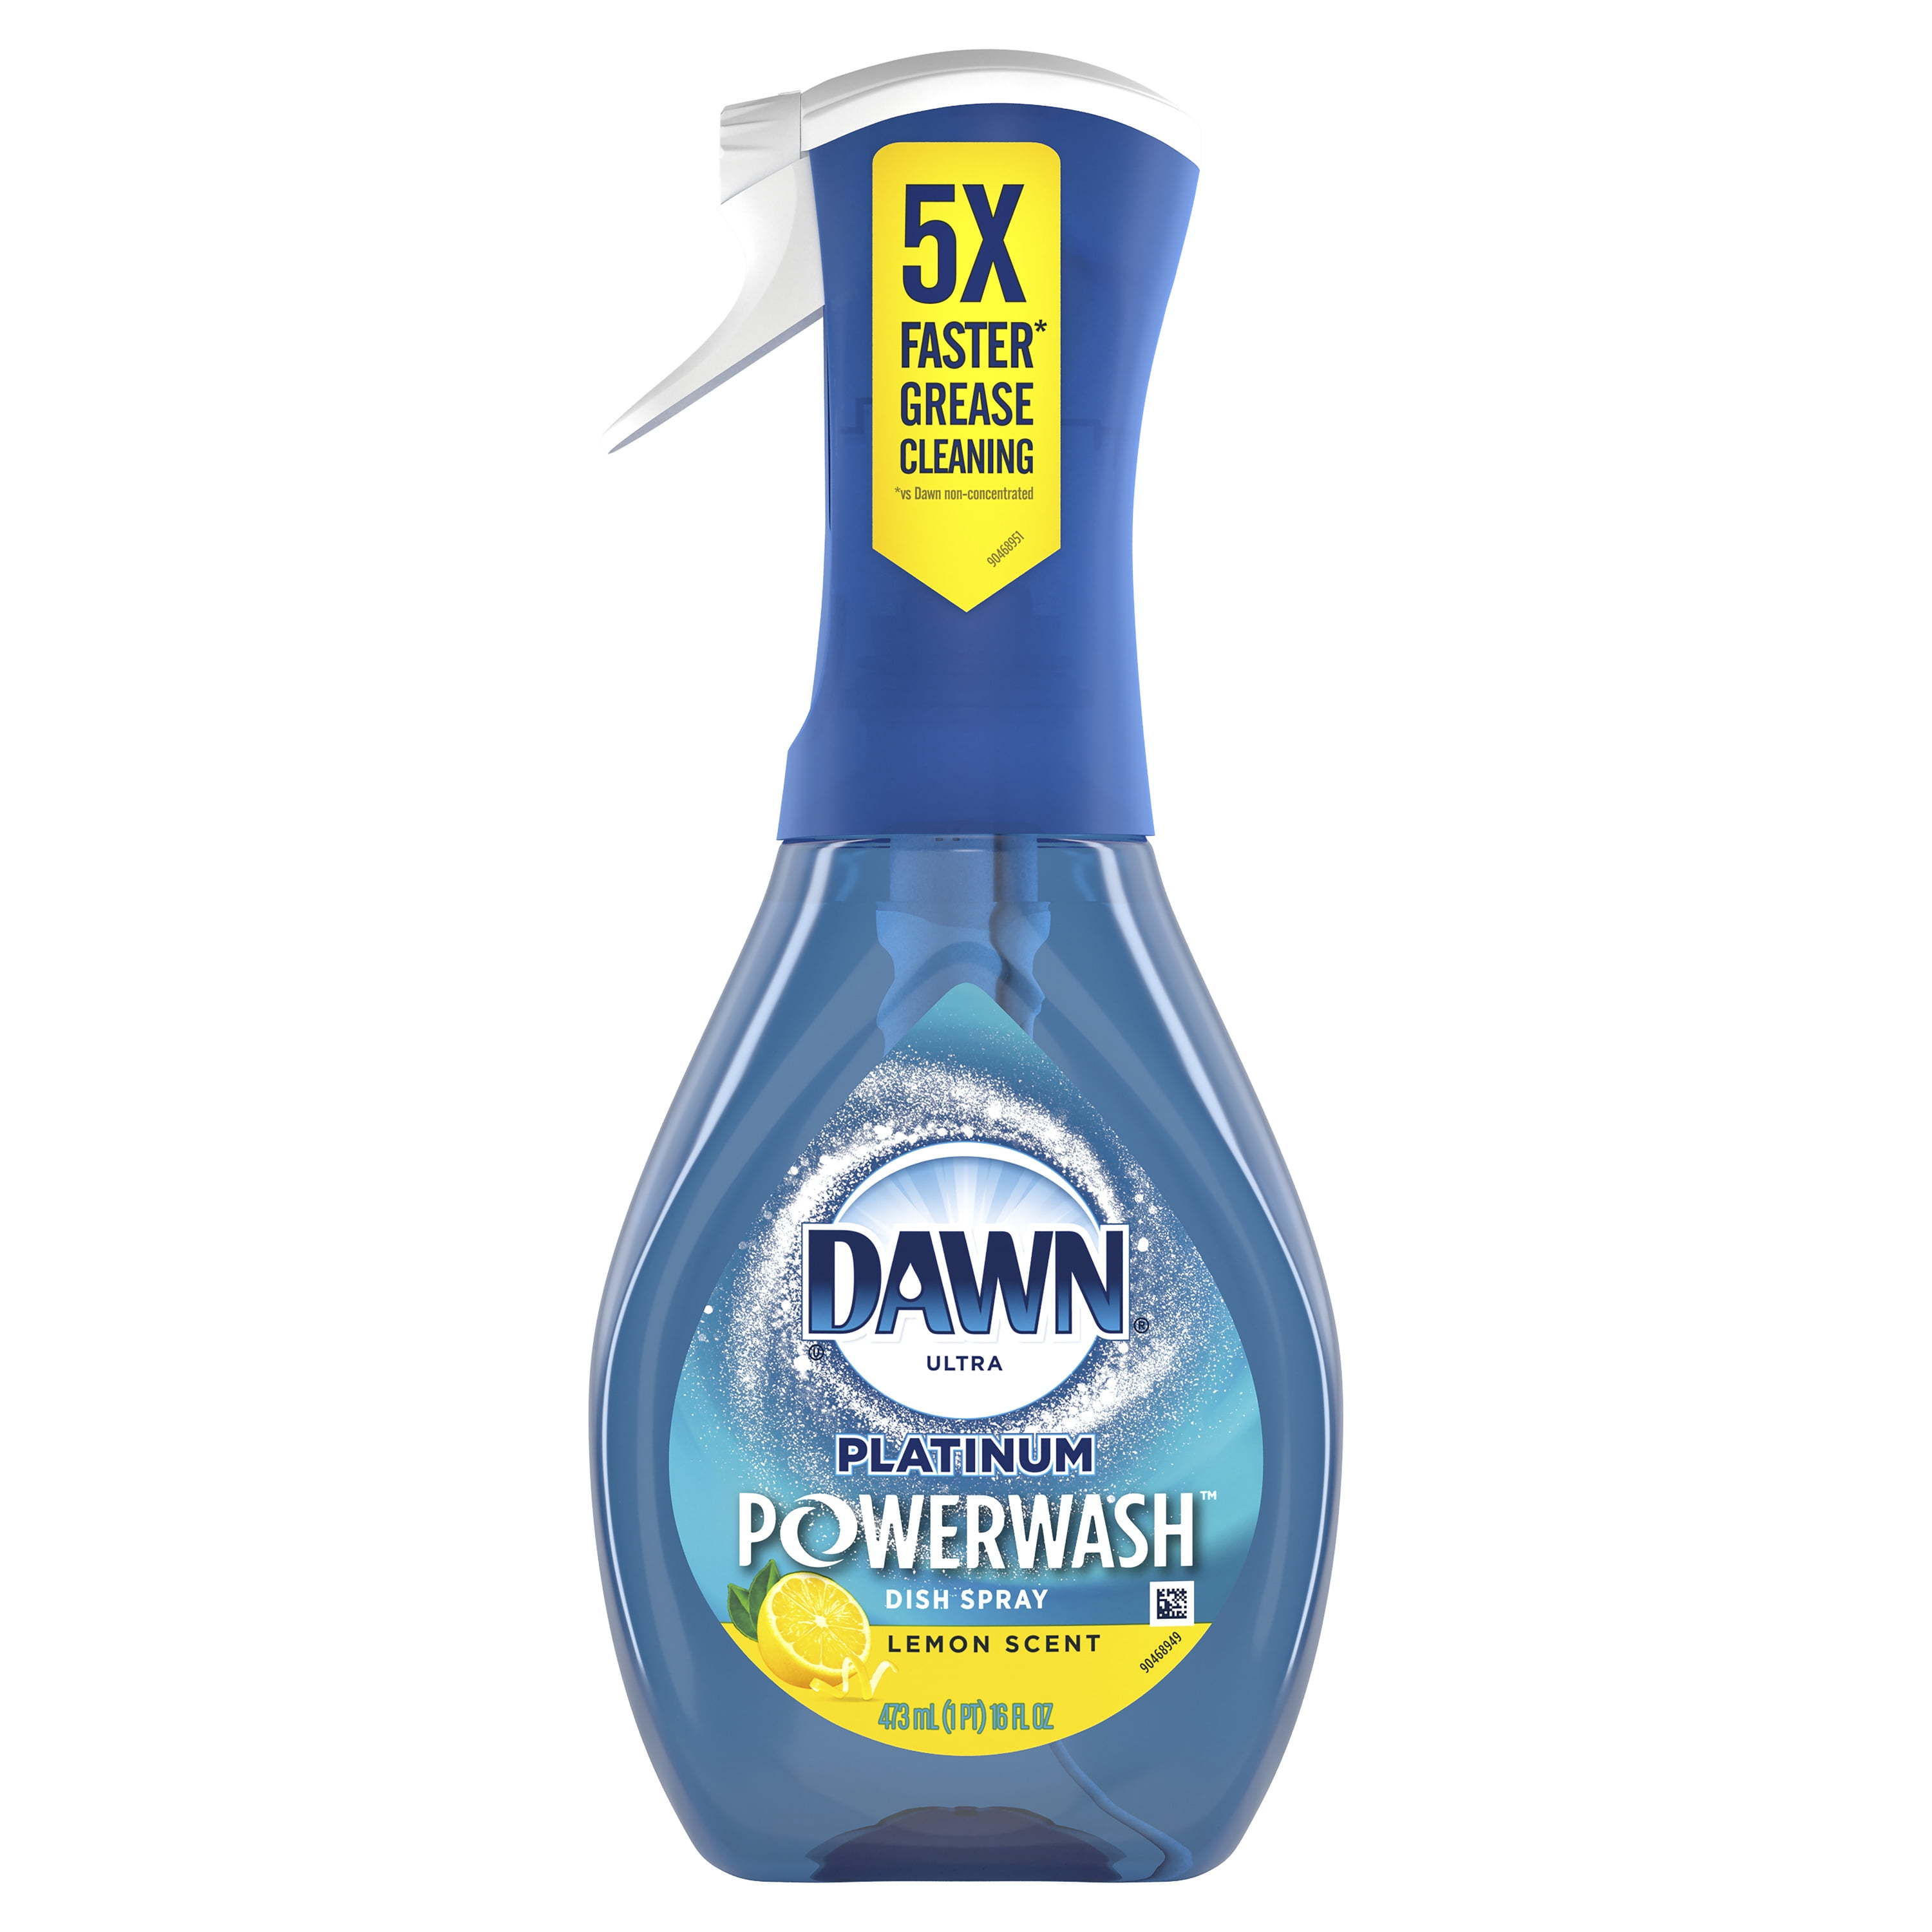 Dawn Platinum Powerwash Dish Spray Review 2023 - The Cleaning Lady